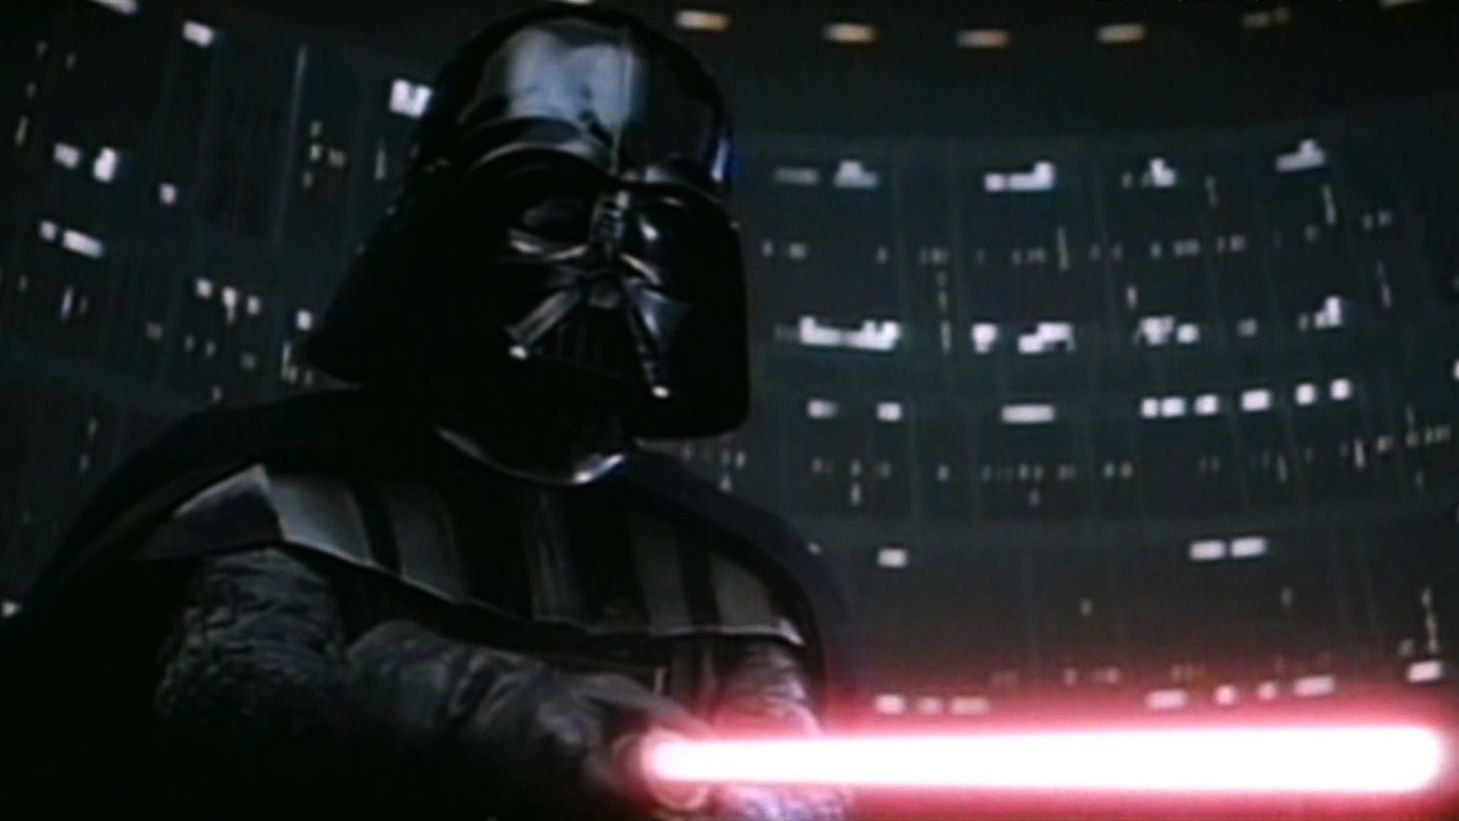 Darth Vader wields a lightsaber. Scientists have created molecules that behave a bit like the matter in the fictional weapons.